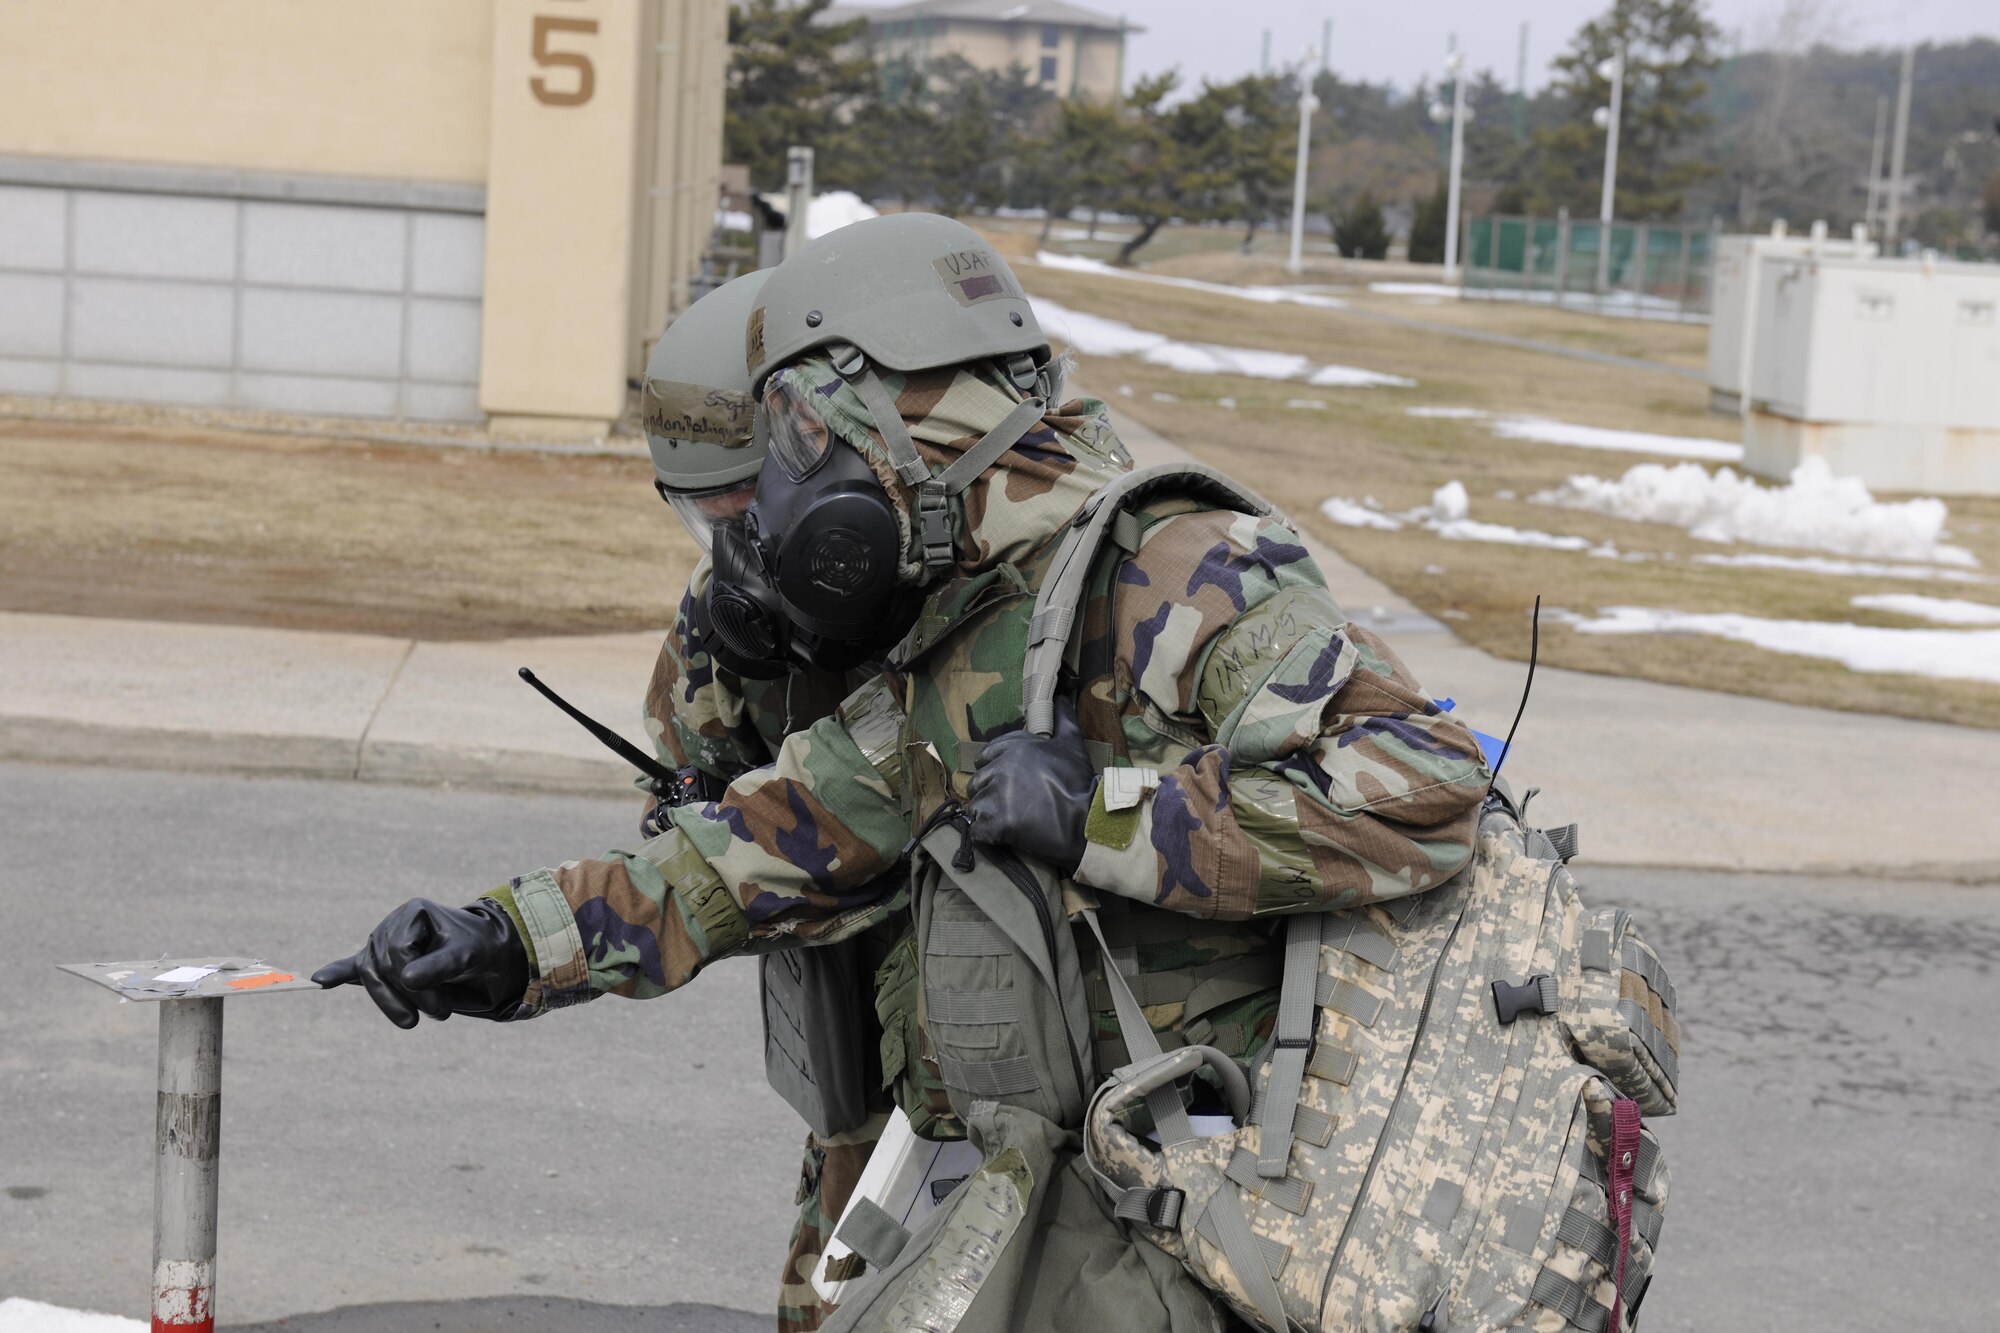 Airmen from the 8th Fighter Wing conduct a post attack reconnaissance sweep after a simulated ground attack during Beverly Pack 16-1, Feb. 4, 2016. The exercise was designed to test the readiness of Airmen with situations they would potentially encounter in a real-world wartime scenario. (U.S. Air Force photo by Senior Airman Dustin King/Released)